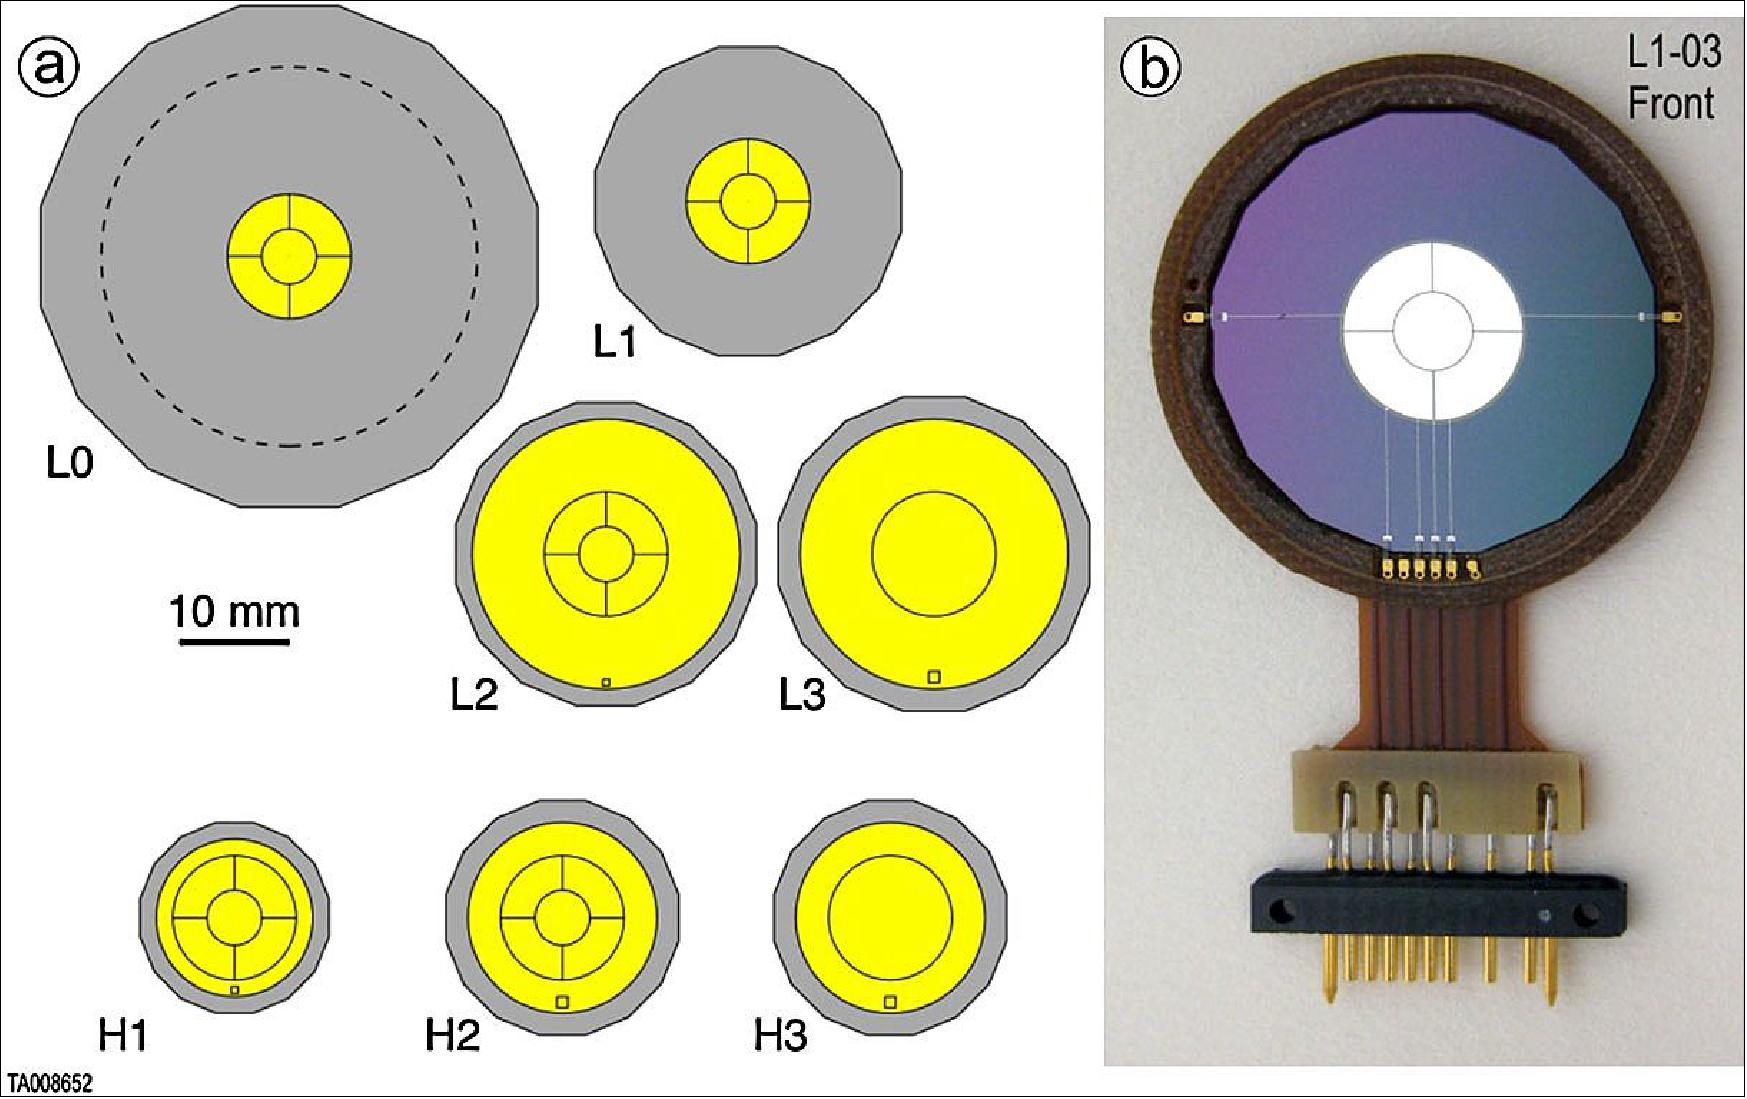 Figure 108: (a) Illustration of the detector segmentation. Detectors L0 through L3 are used in LET; detectors H1 through H3 are used in HET. The dashed line in the L0 detector drawing indicates the diameter inside which the silicon thickness is 12 µm. The L4, L5, and L6 detectors are identical to L3 while the H4 and H5 detectors are identical to H3. (b) Photograph of a prototype L1 detector (image credit: ISIS-EPI collaboration)